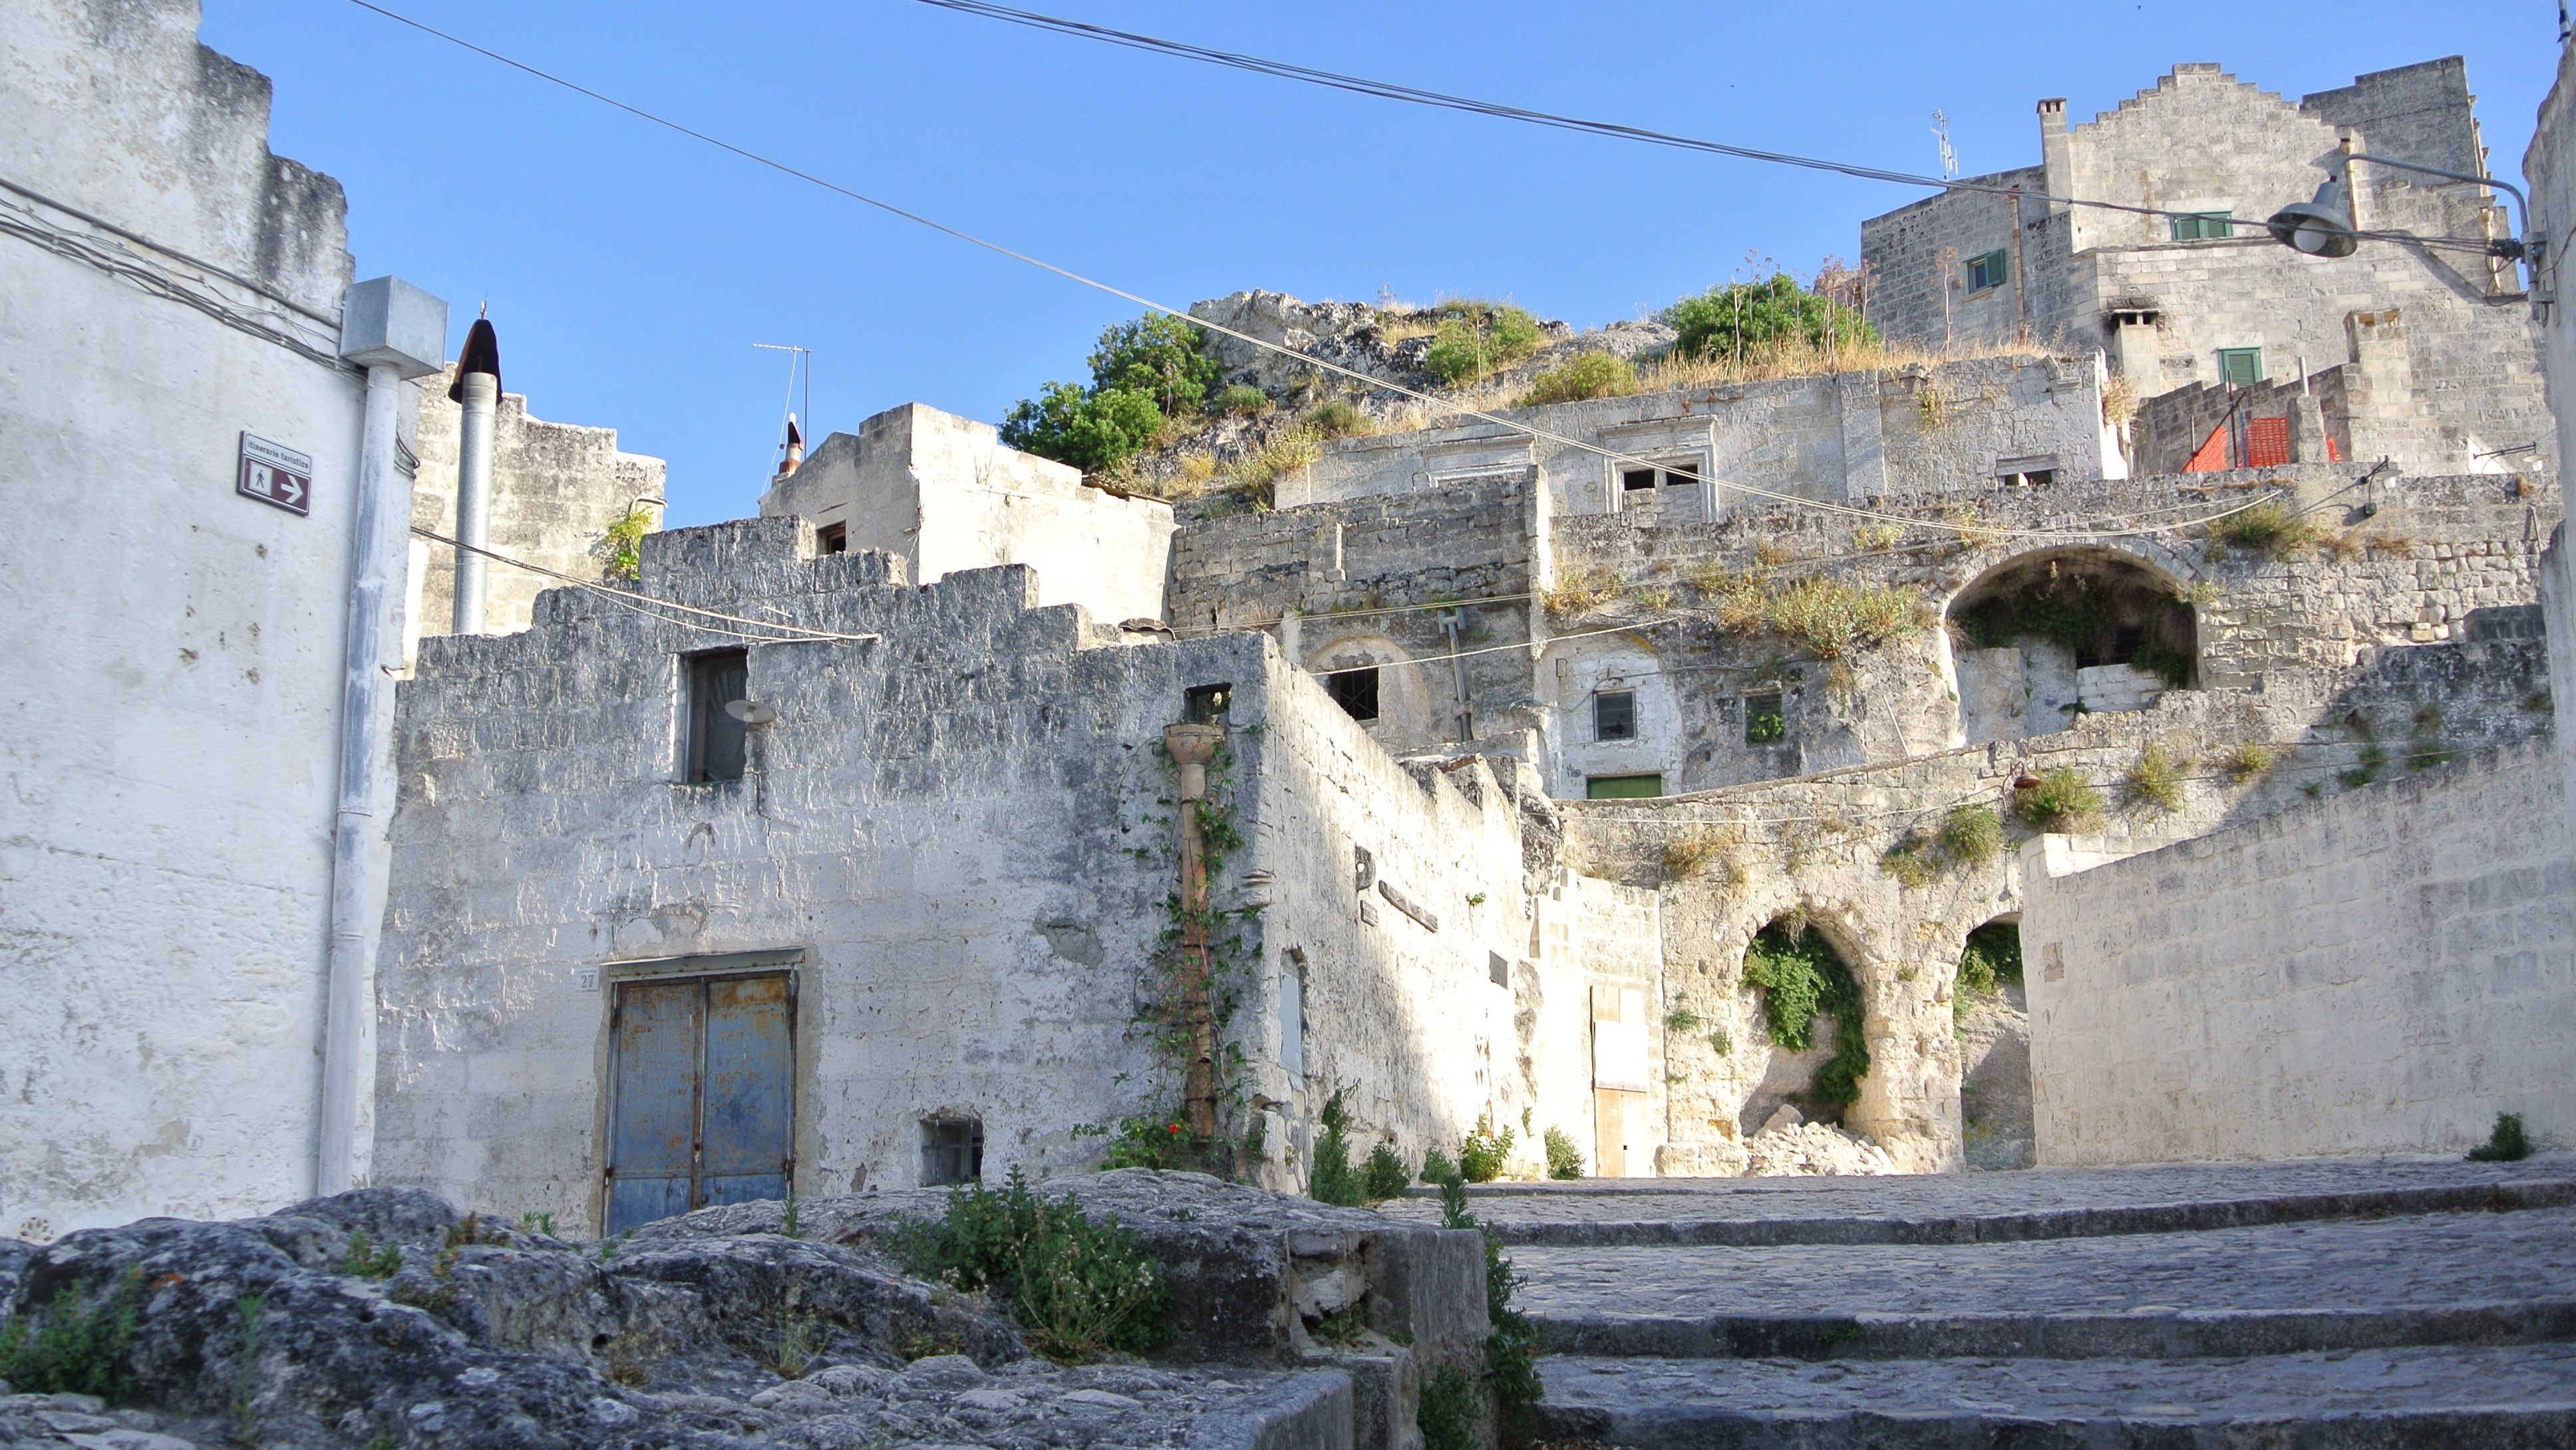 A street with houses cut into rock in Matera, Italy